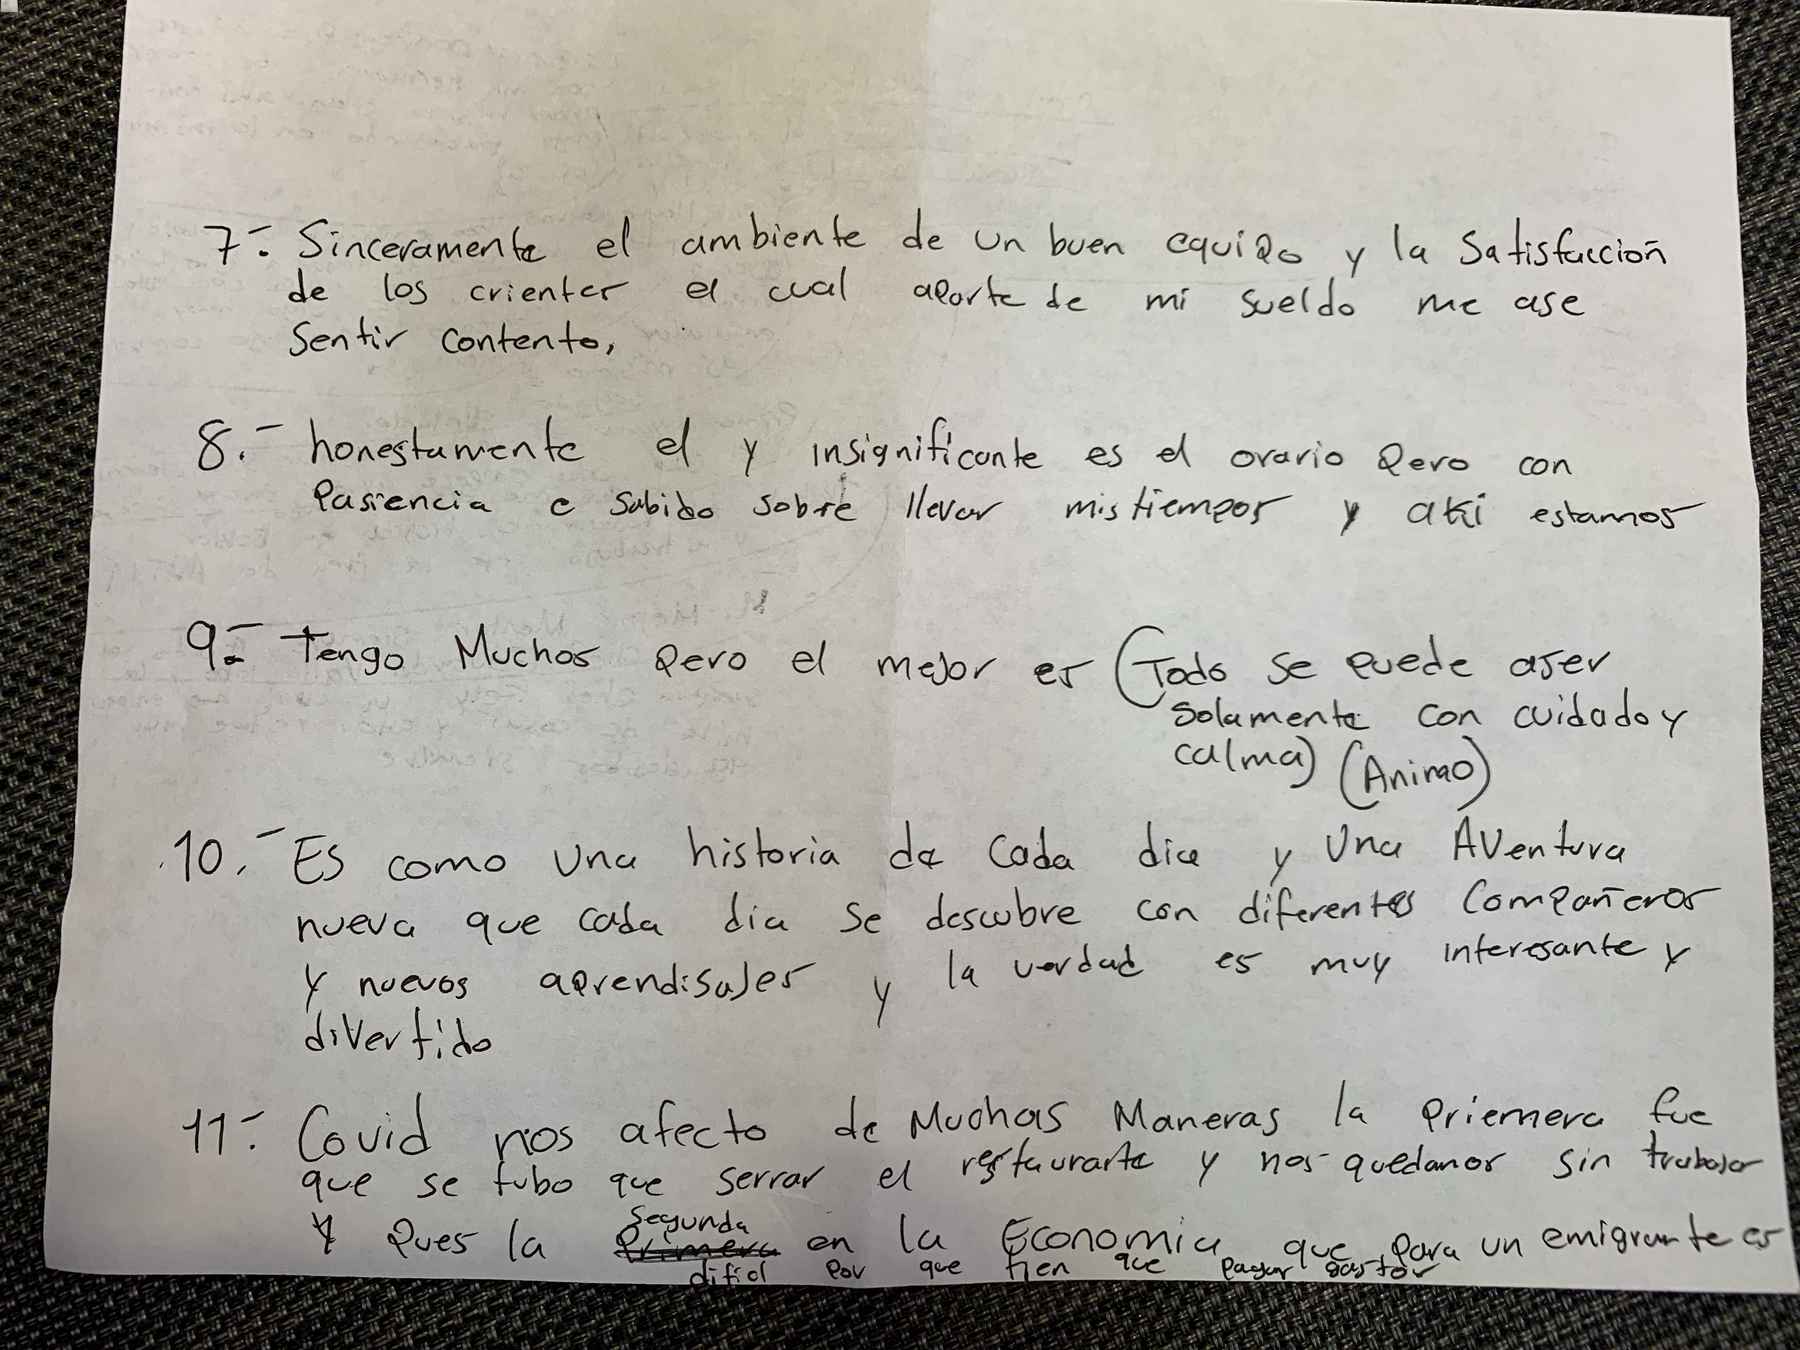 Handwritten list of answers in Spanish for Kitchen Culture Q&A unsung heroes.